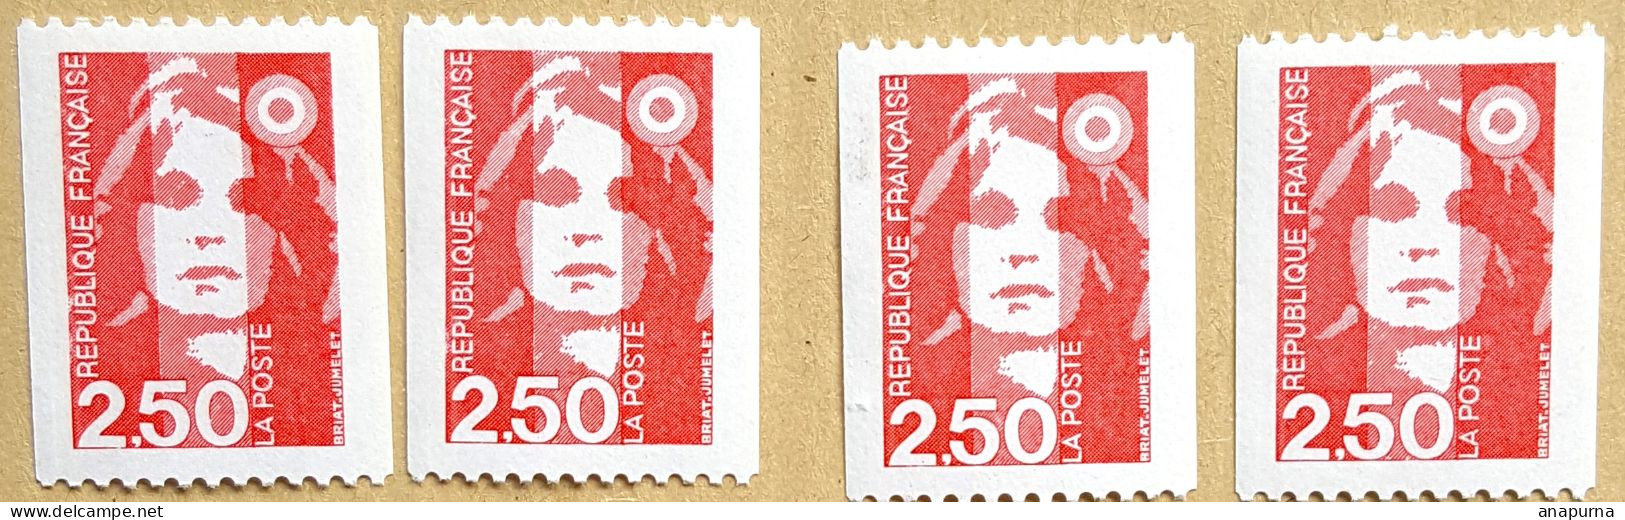 Lot 4 Timbres Roulette Briat, 2719a, Marianne, Bicentenaire, 2,50F - Coil Stamps